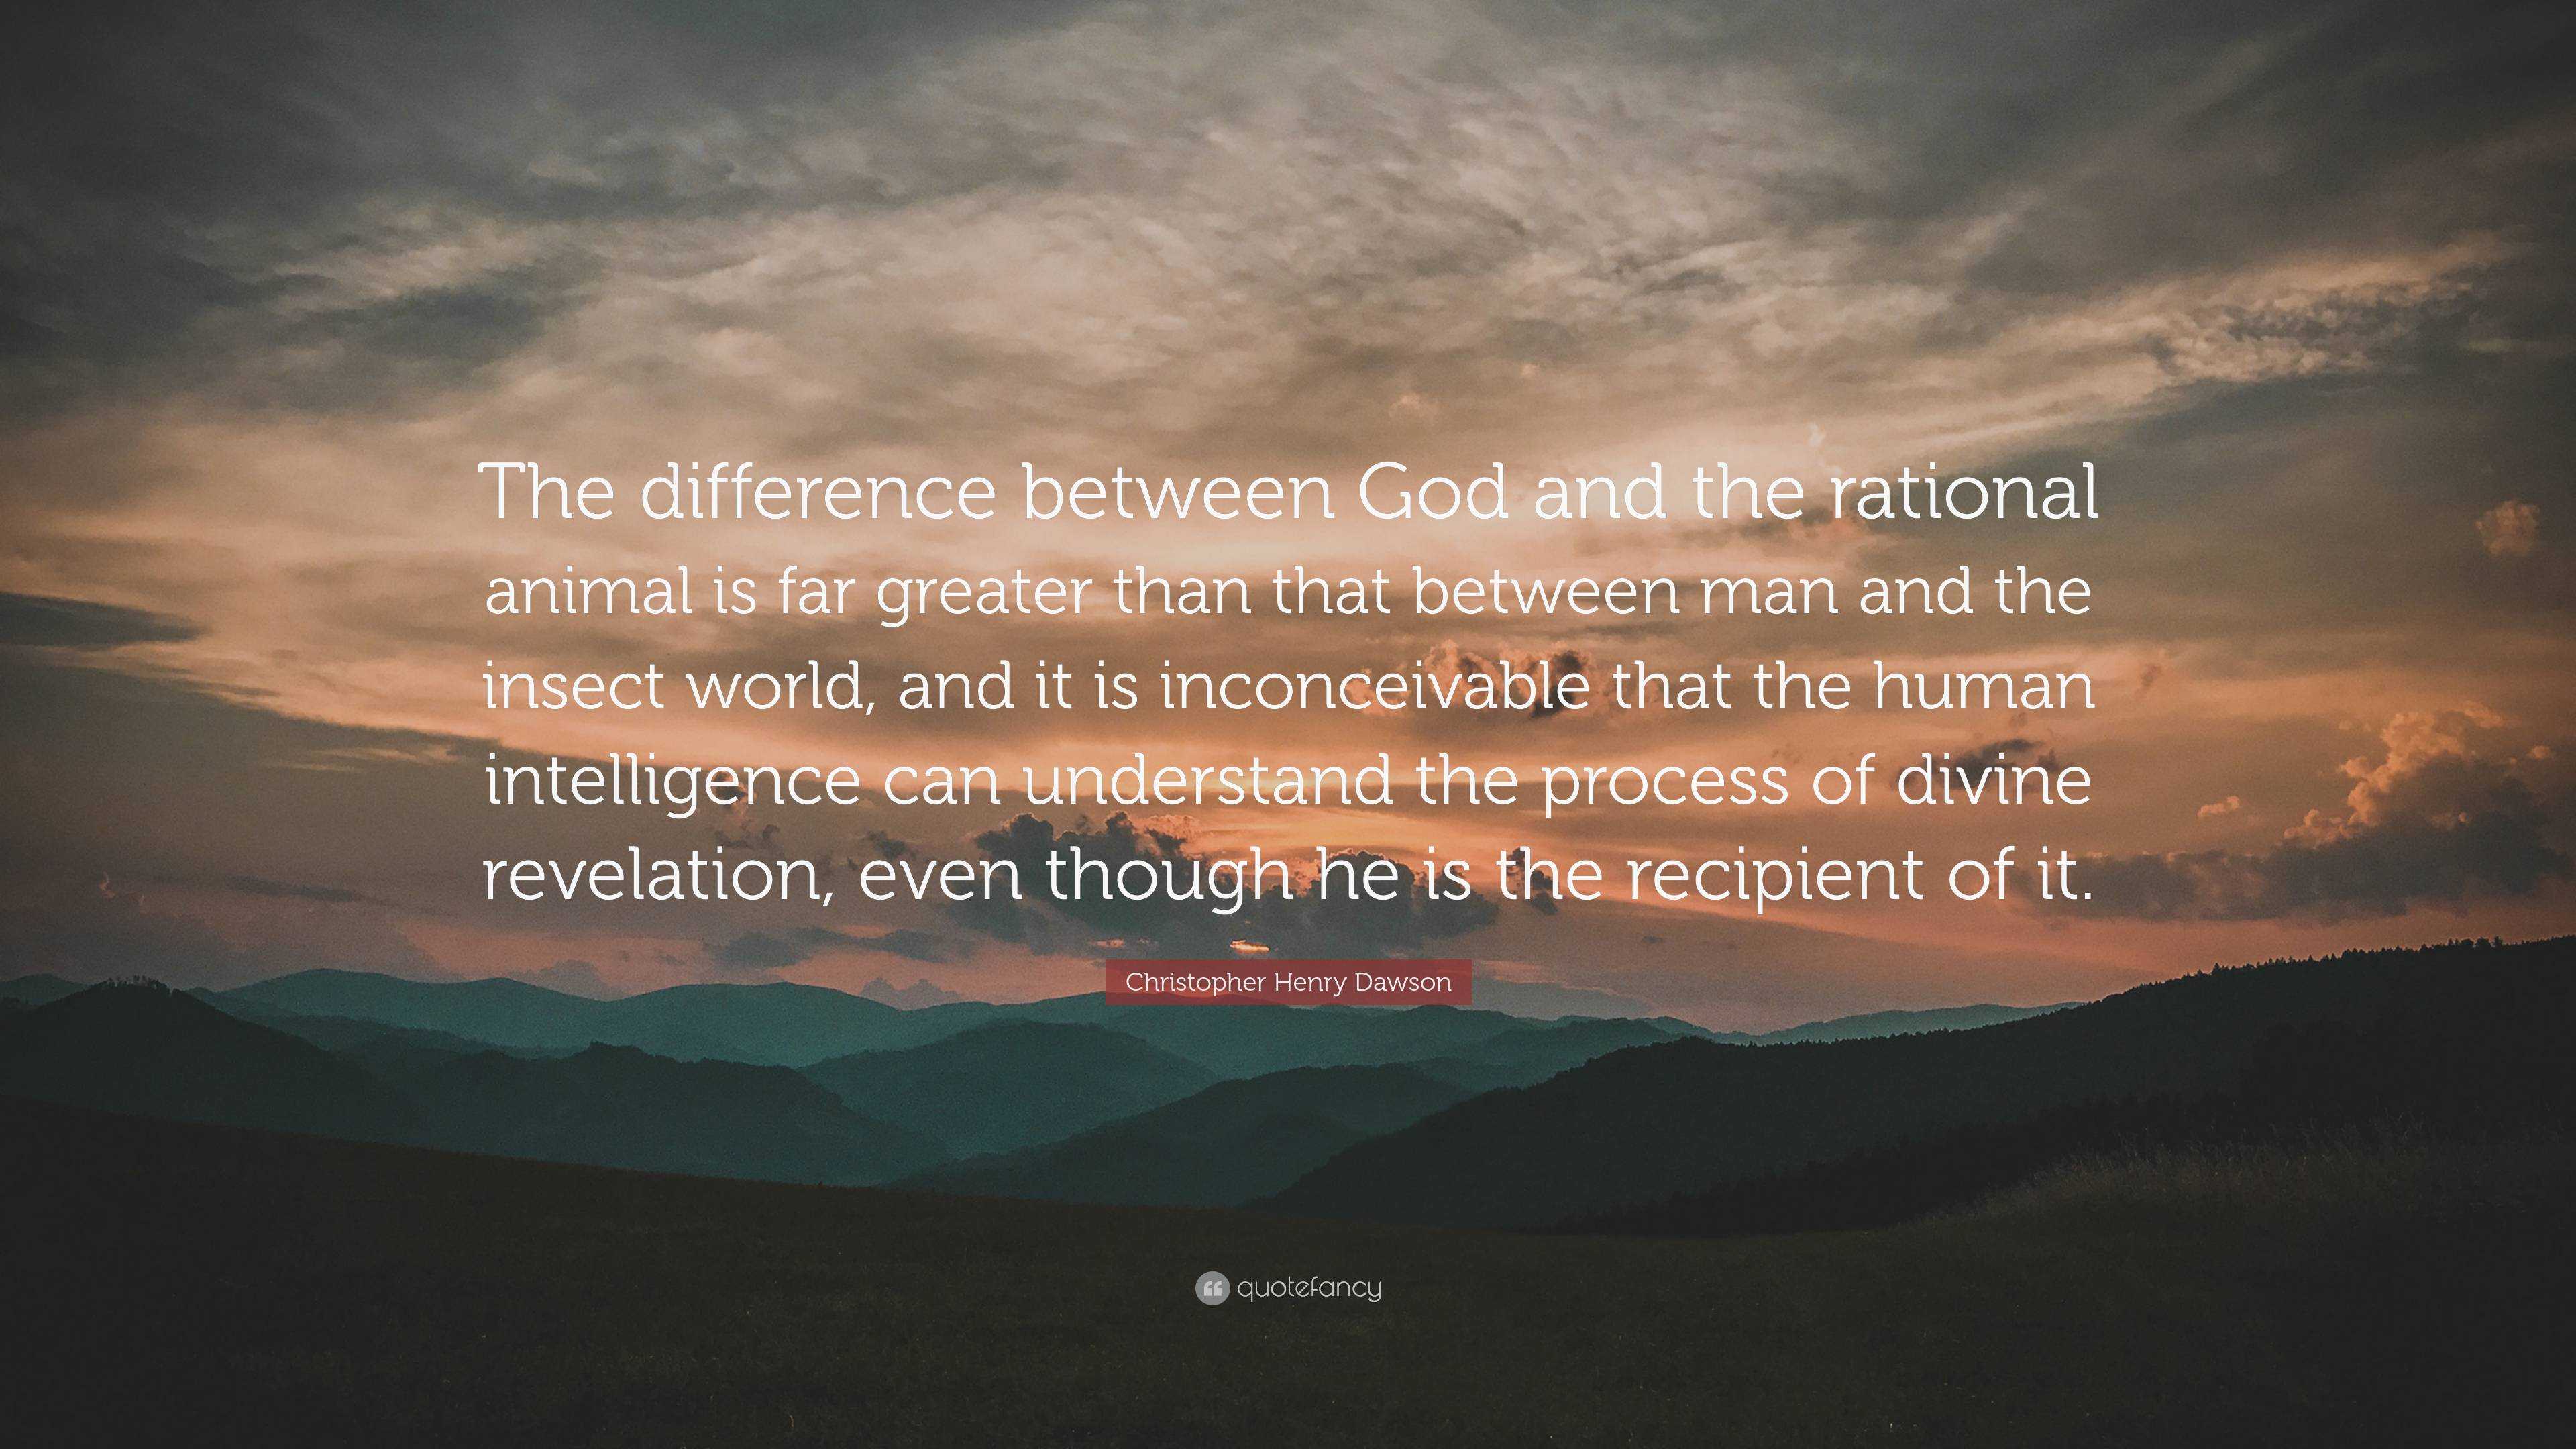 Christopher Henry Dawson Quote: “The difference between God and the  rational animal is far greater than that between man and the insect world,  and it is ...”